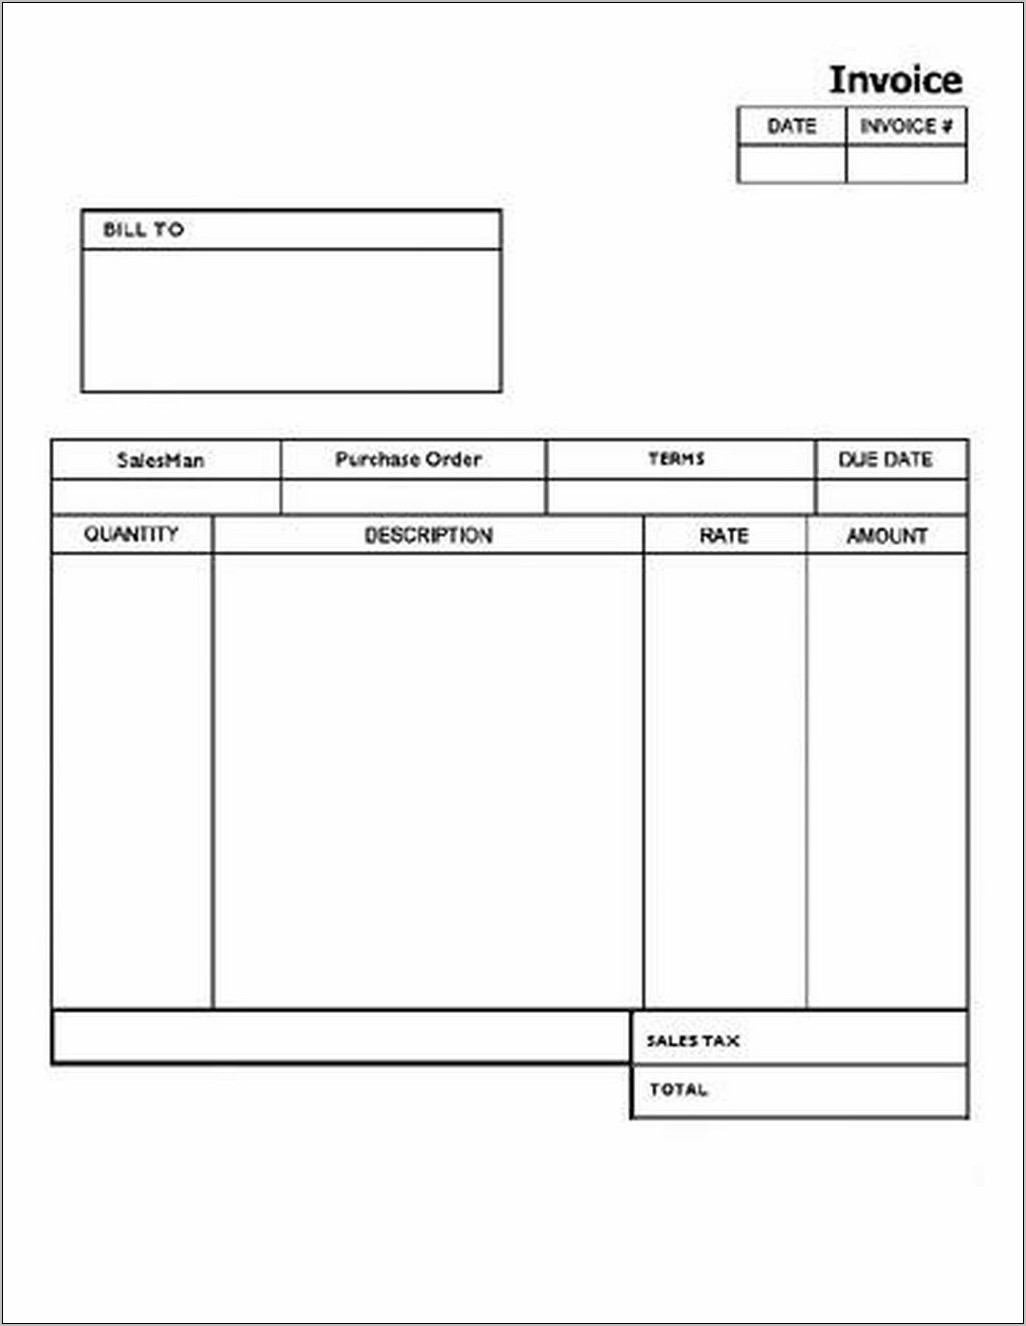 Print Blank Invoice Forms